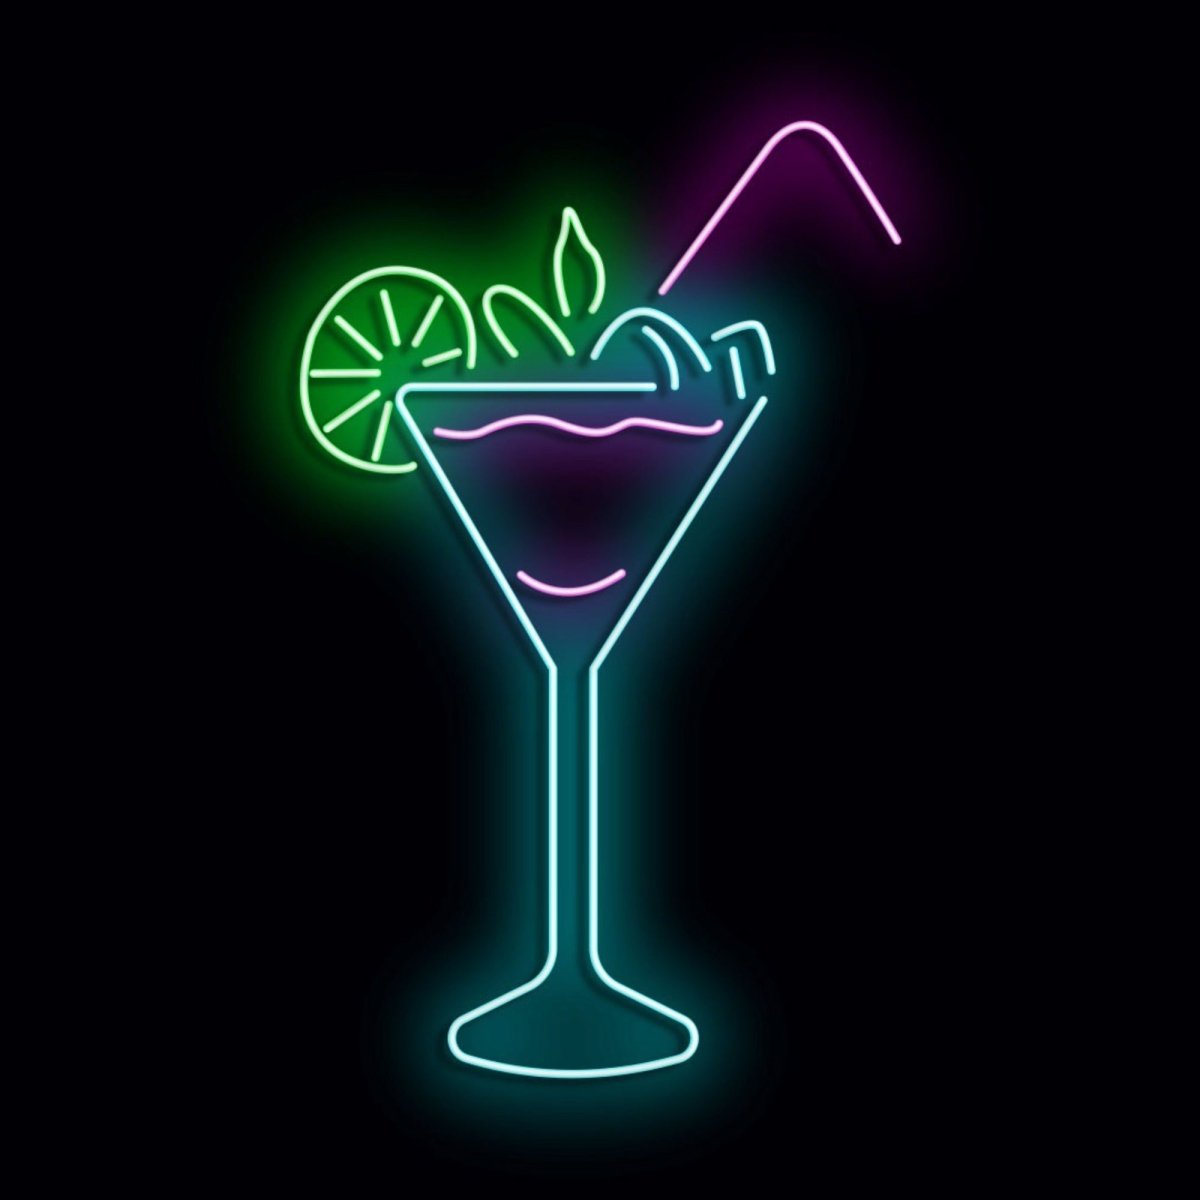 Personalised LED Neon Sign G & T2 - madaboutneon